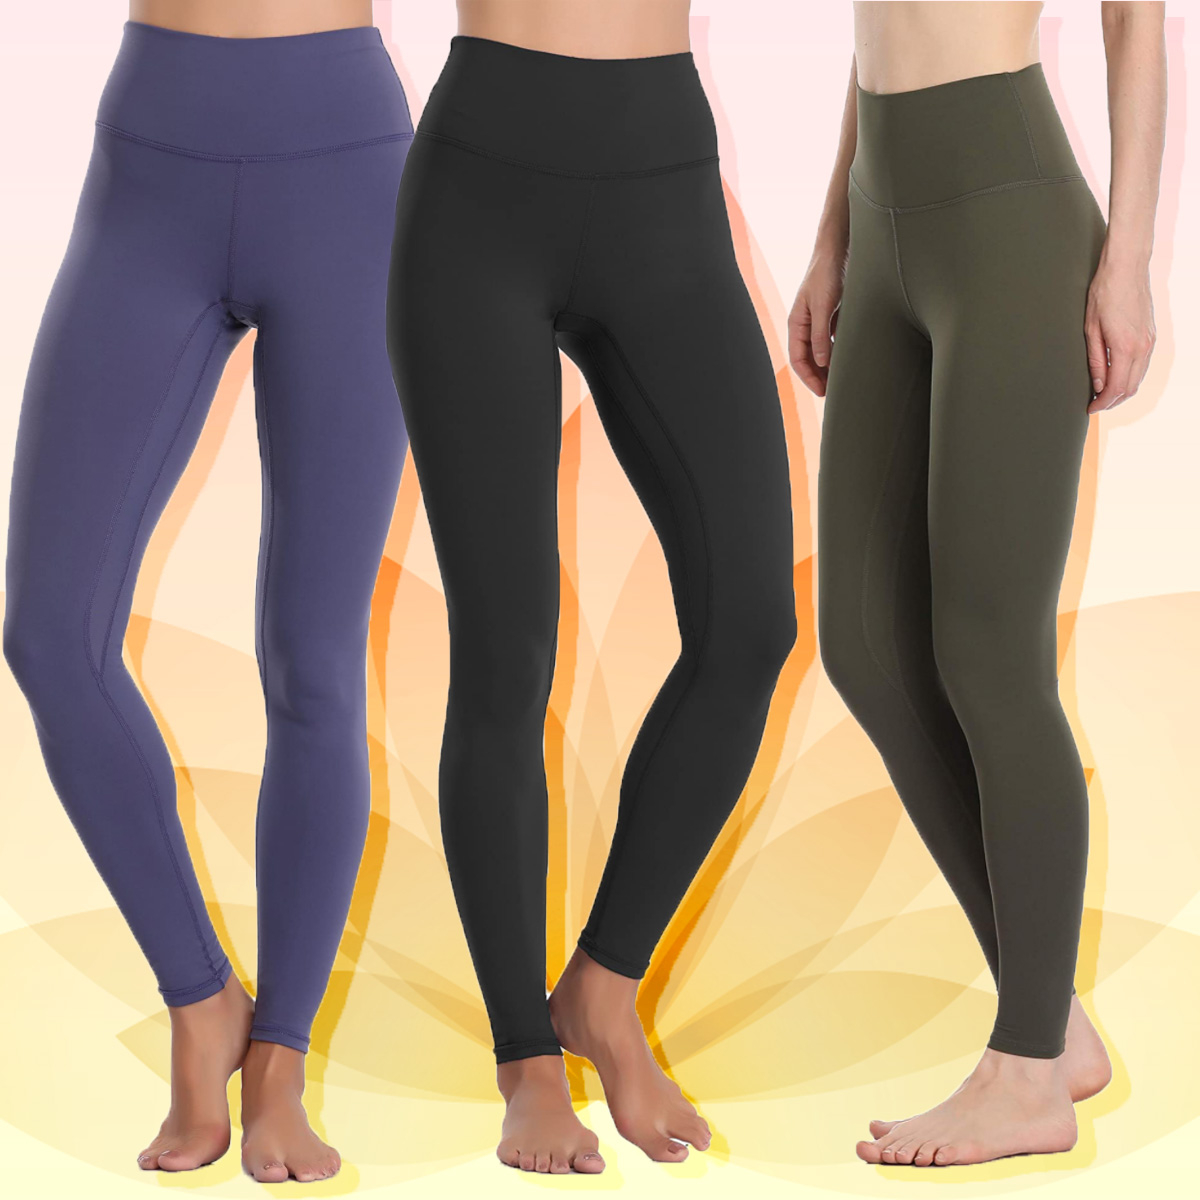 These Buttery Soft $23 Leggings Have 12,000 Five-Star